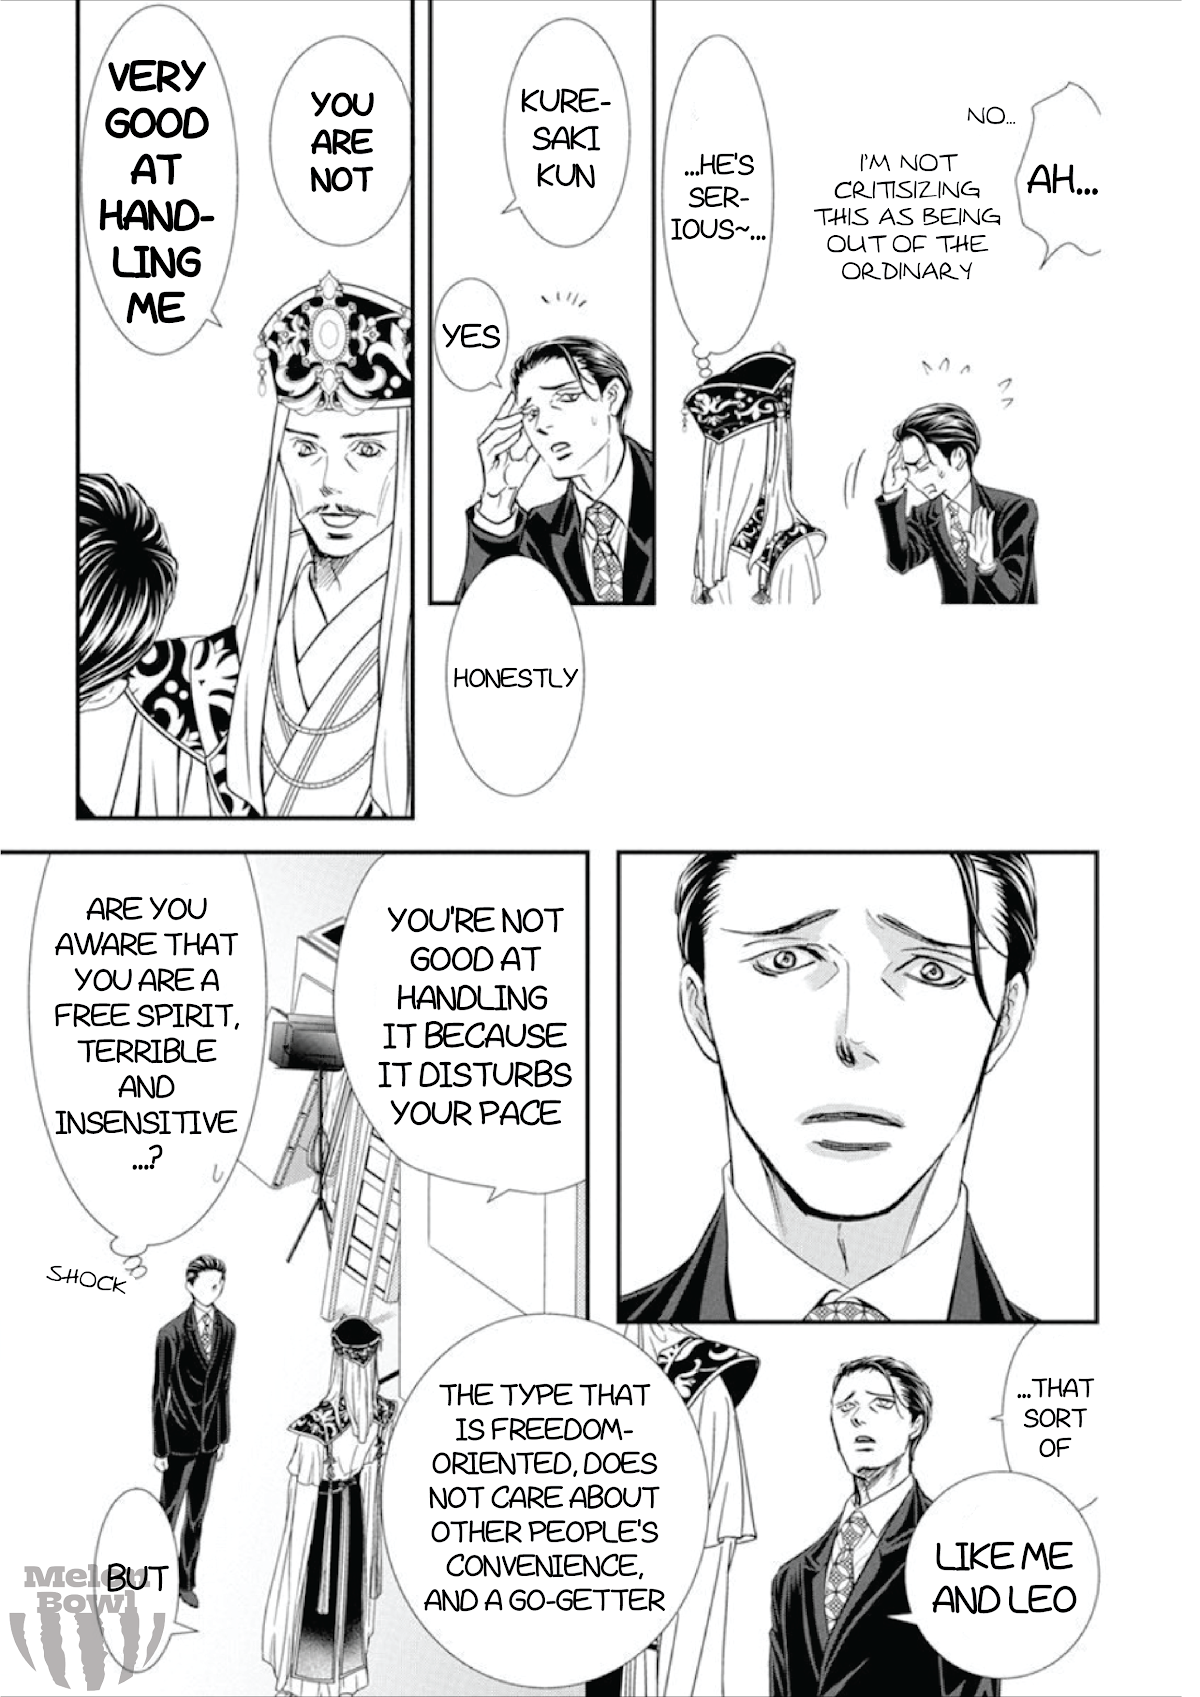 Skip Beat!, Chapter 307 Fairytale Dialogue image 06